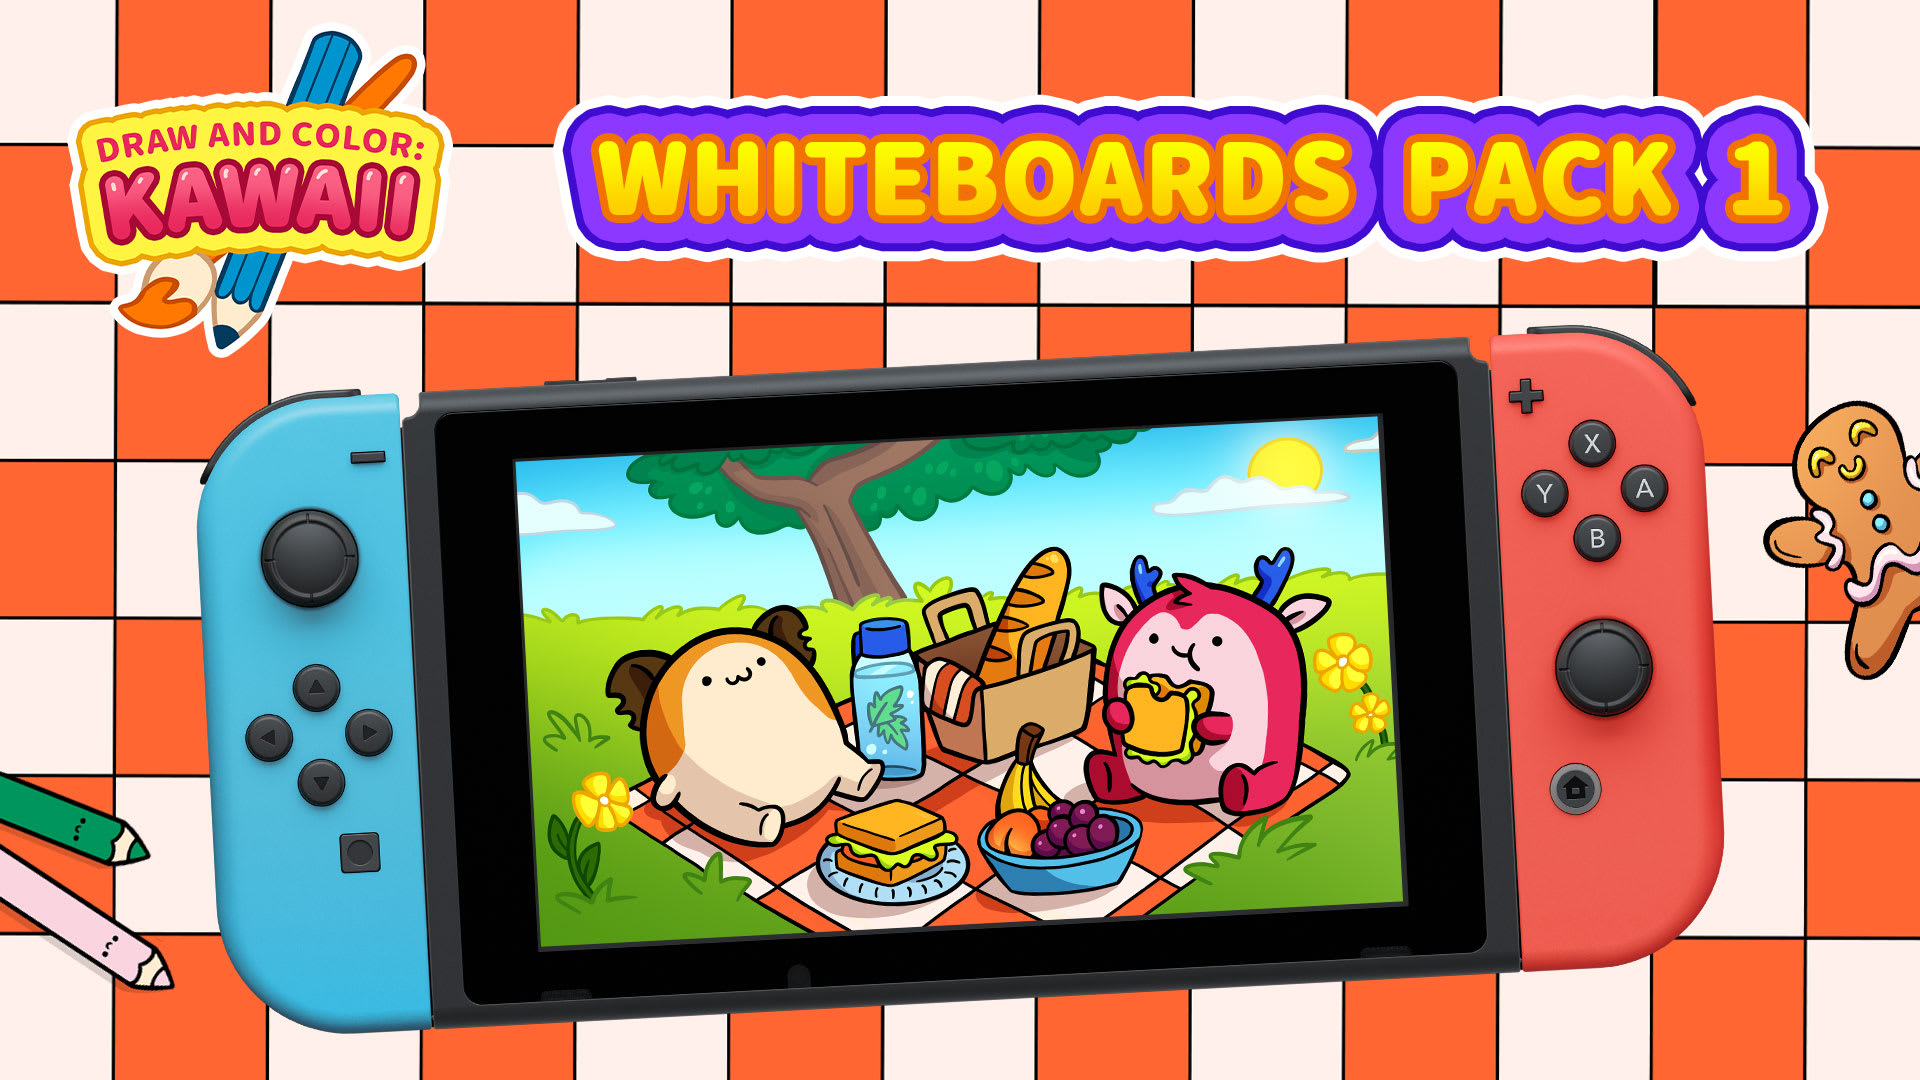 Whiteboards Pack 1